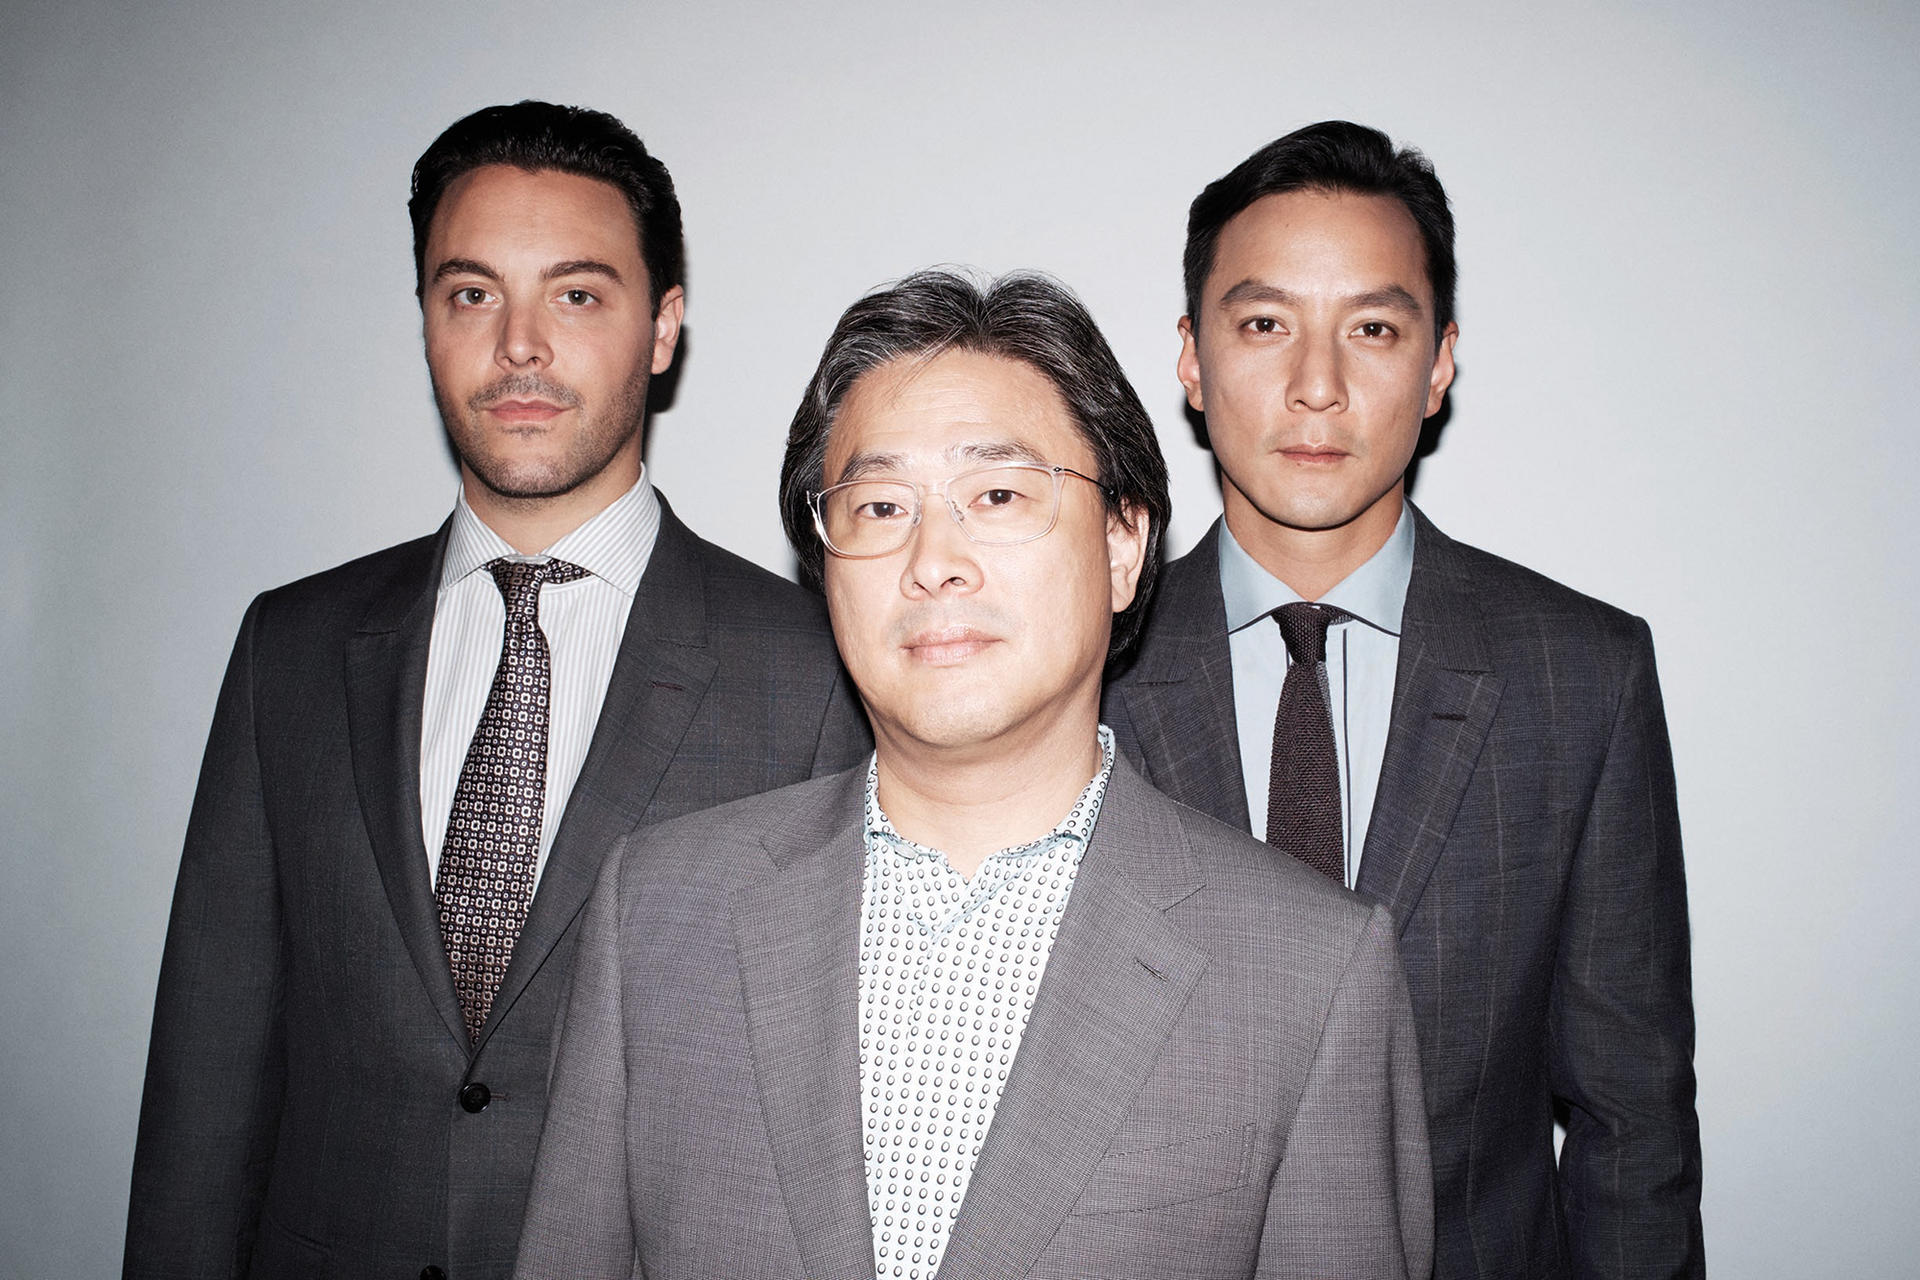 From left: Jack Huston, Park Chan-wook and Daniel Wu.